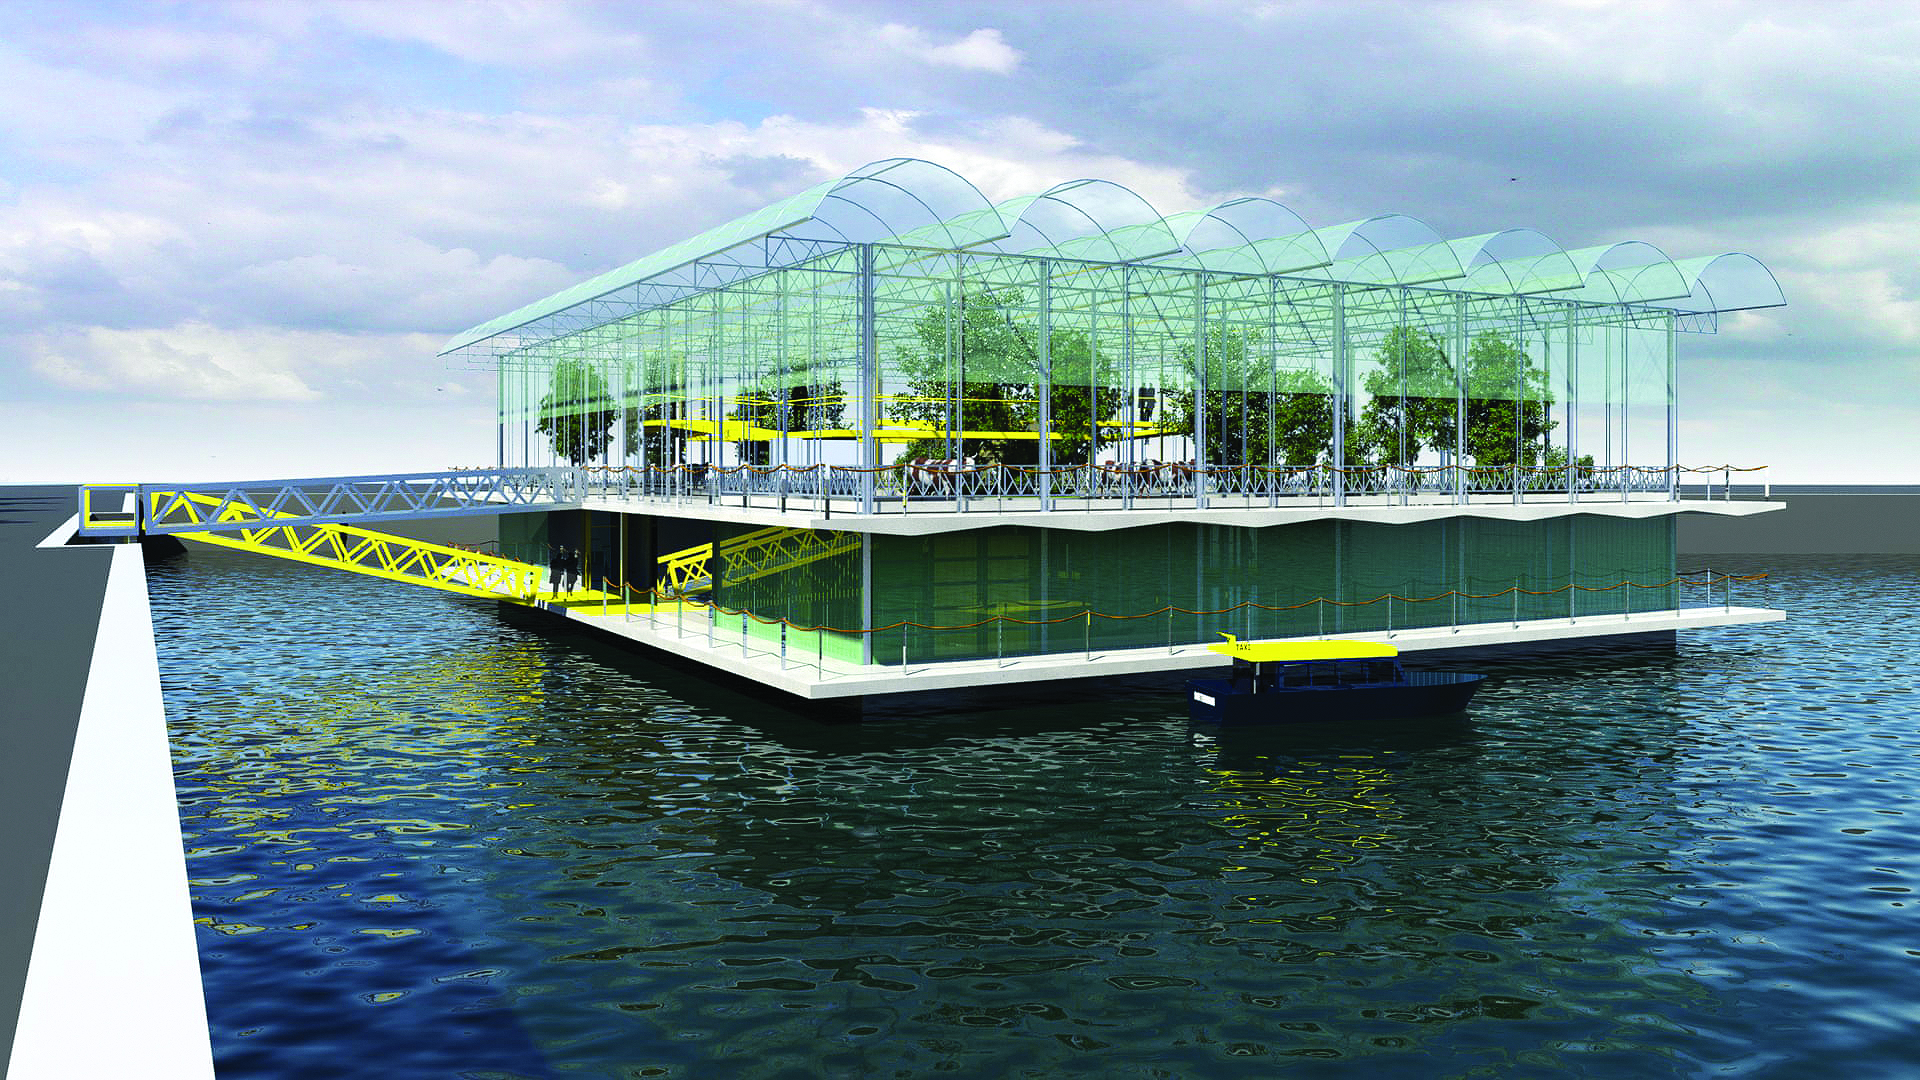 An illustration of a floating dairy farm due to open in Rotterdam.